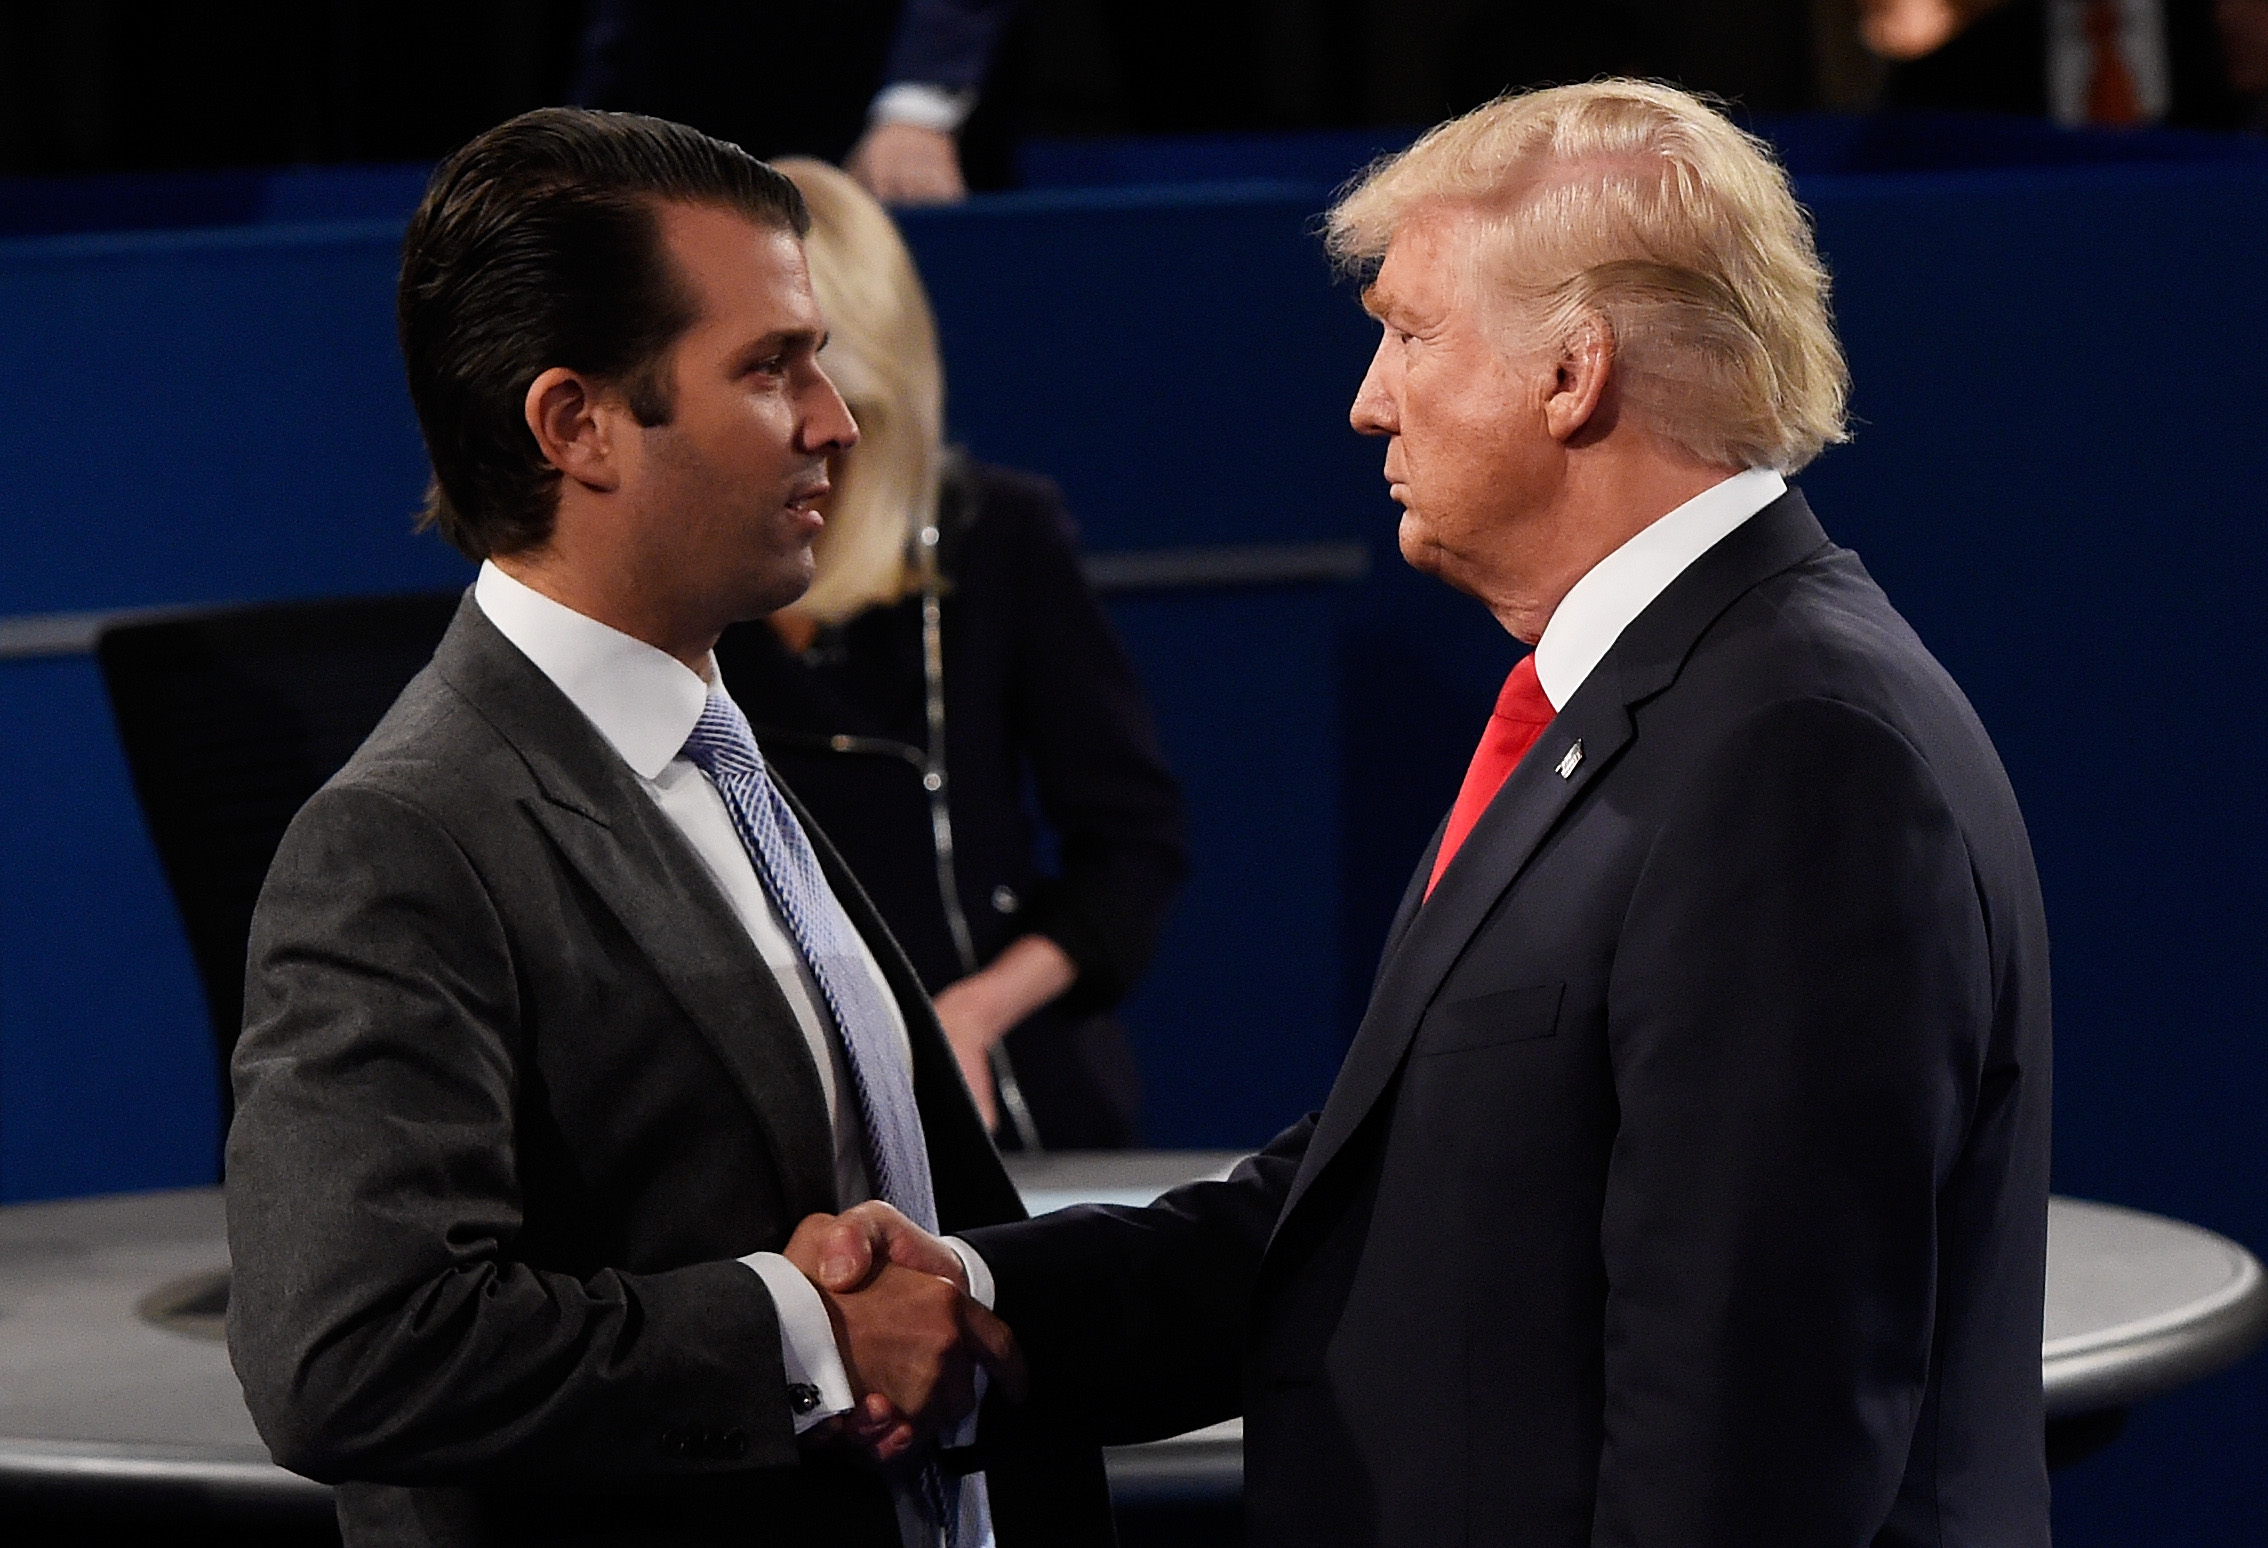 Donald Trump Jr. Will Run For President in 2024 and He'll Likely Win Republican Nomination, GOP Strategist Says